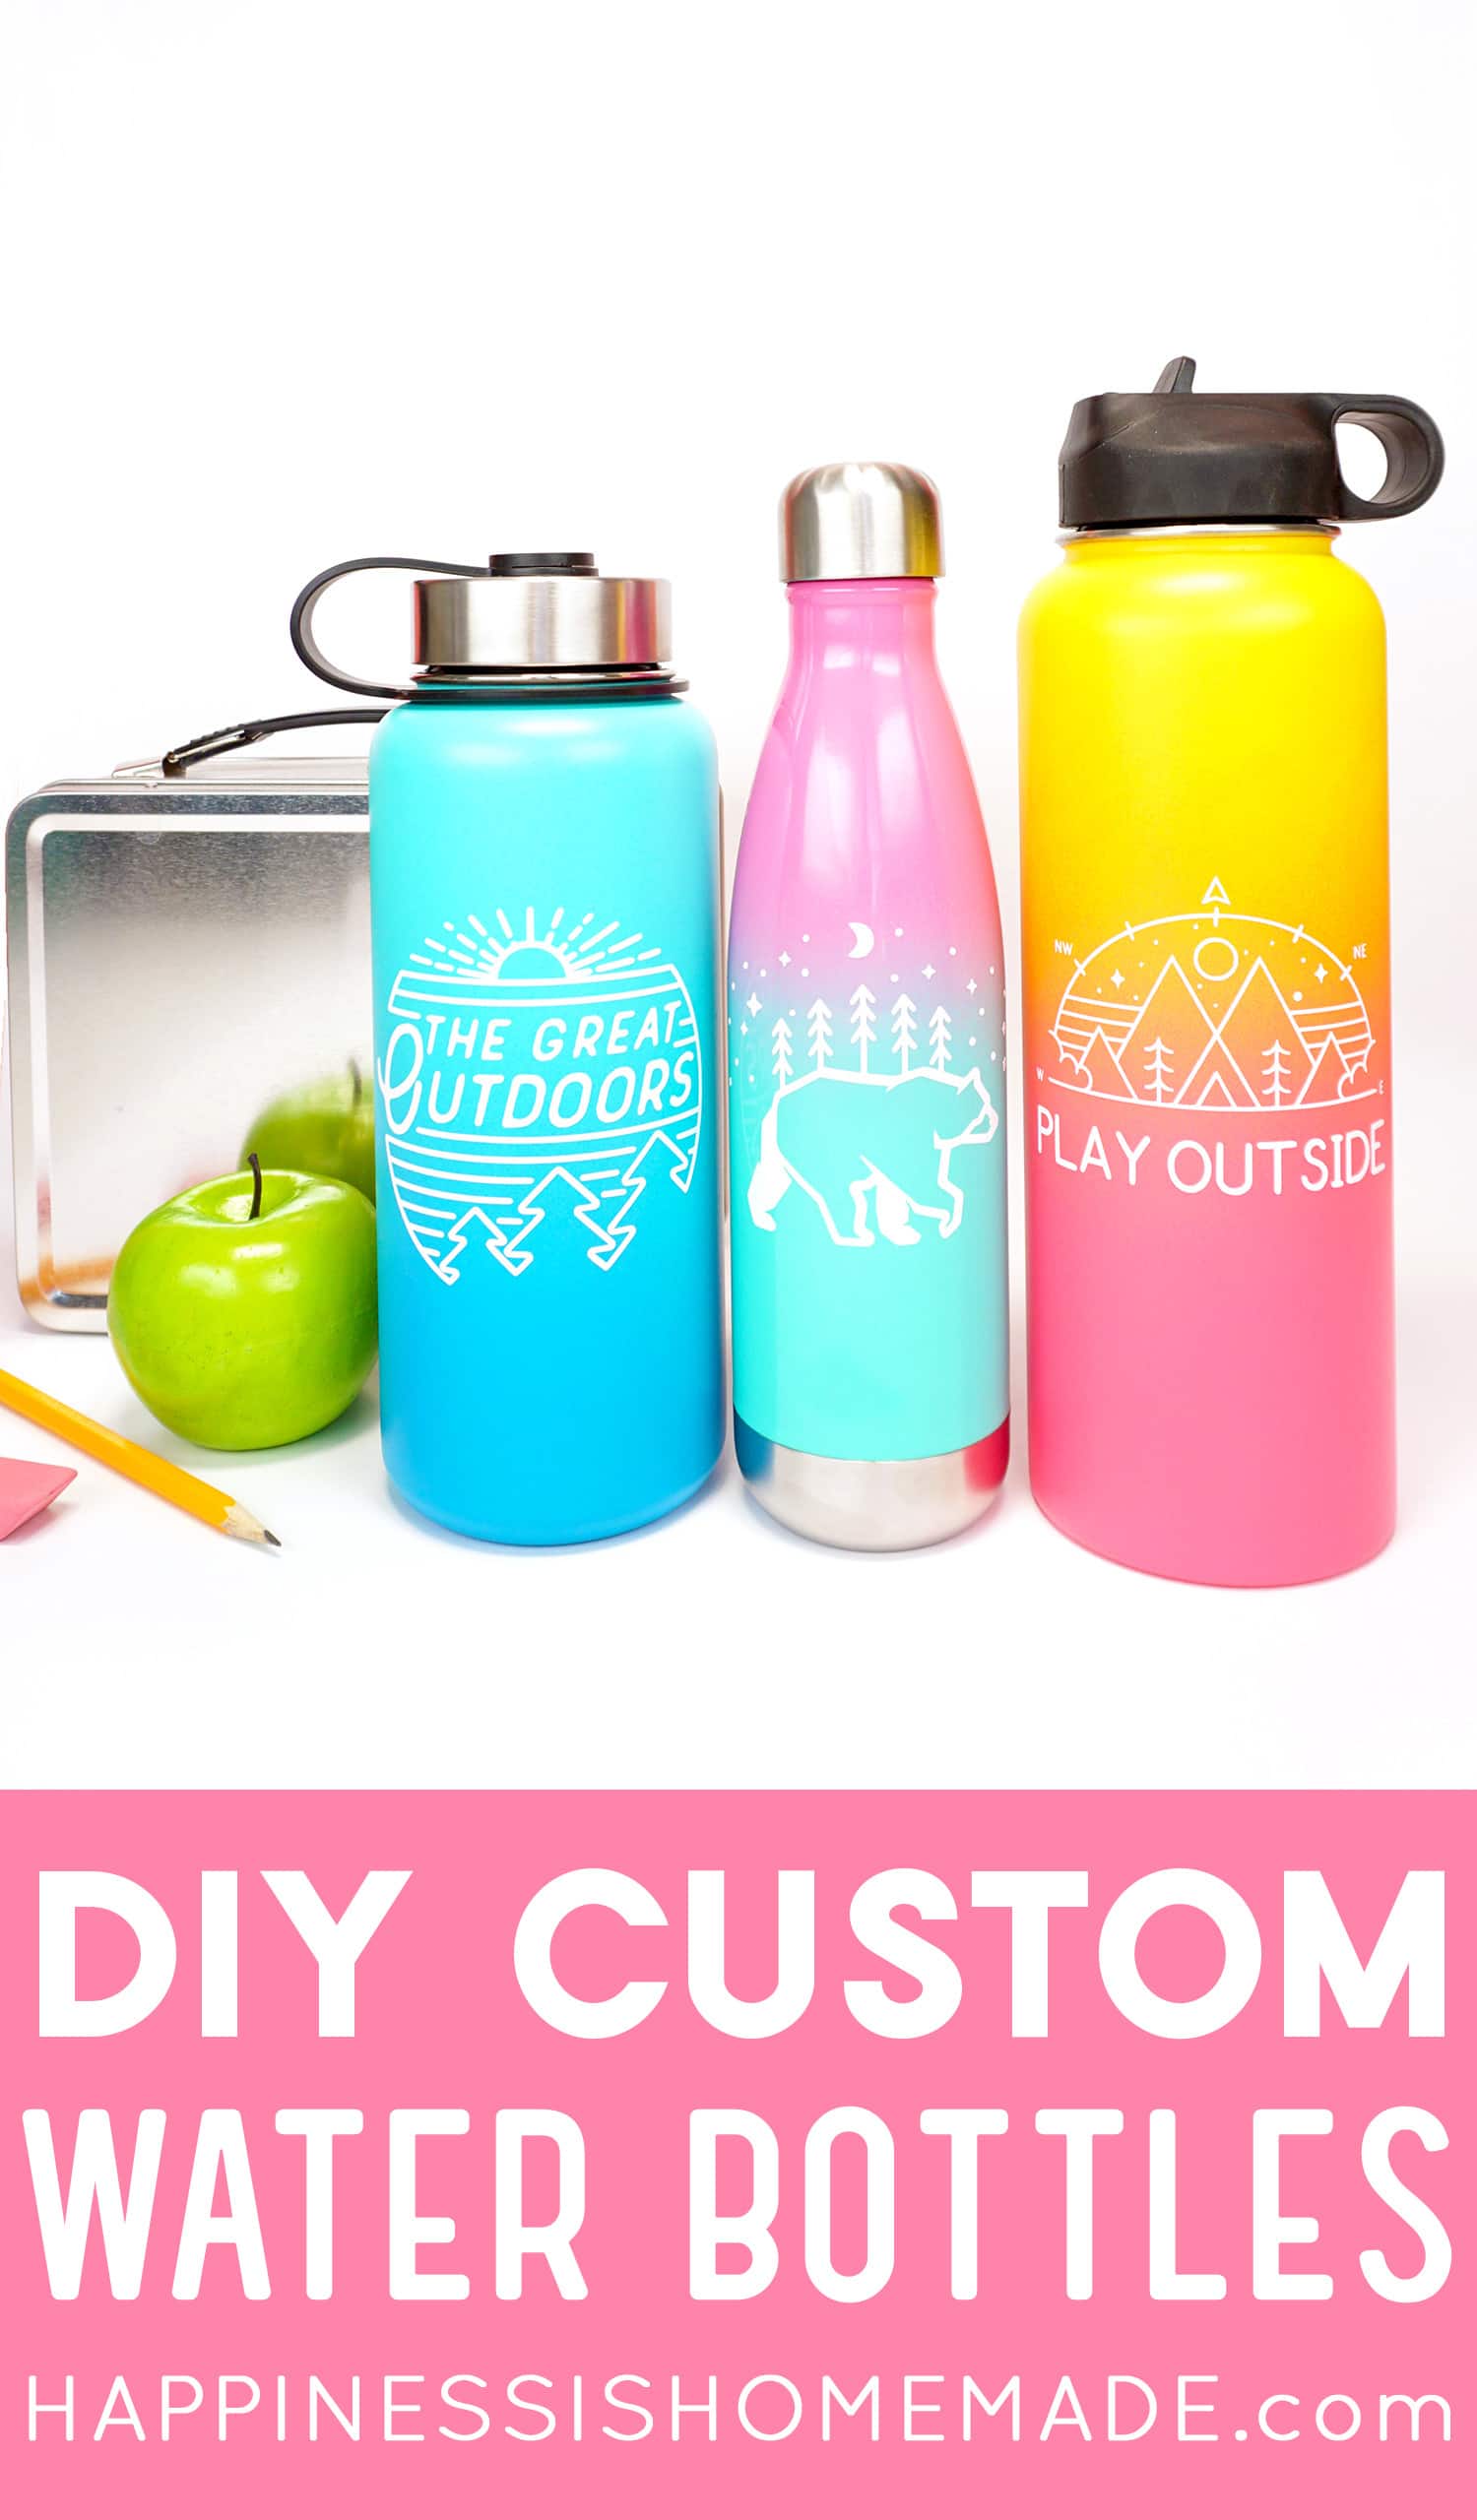 How to Personalize a Water Bottle